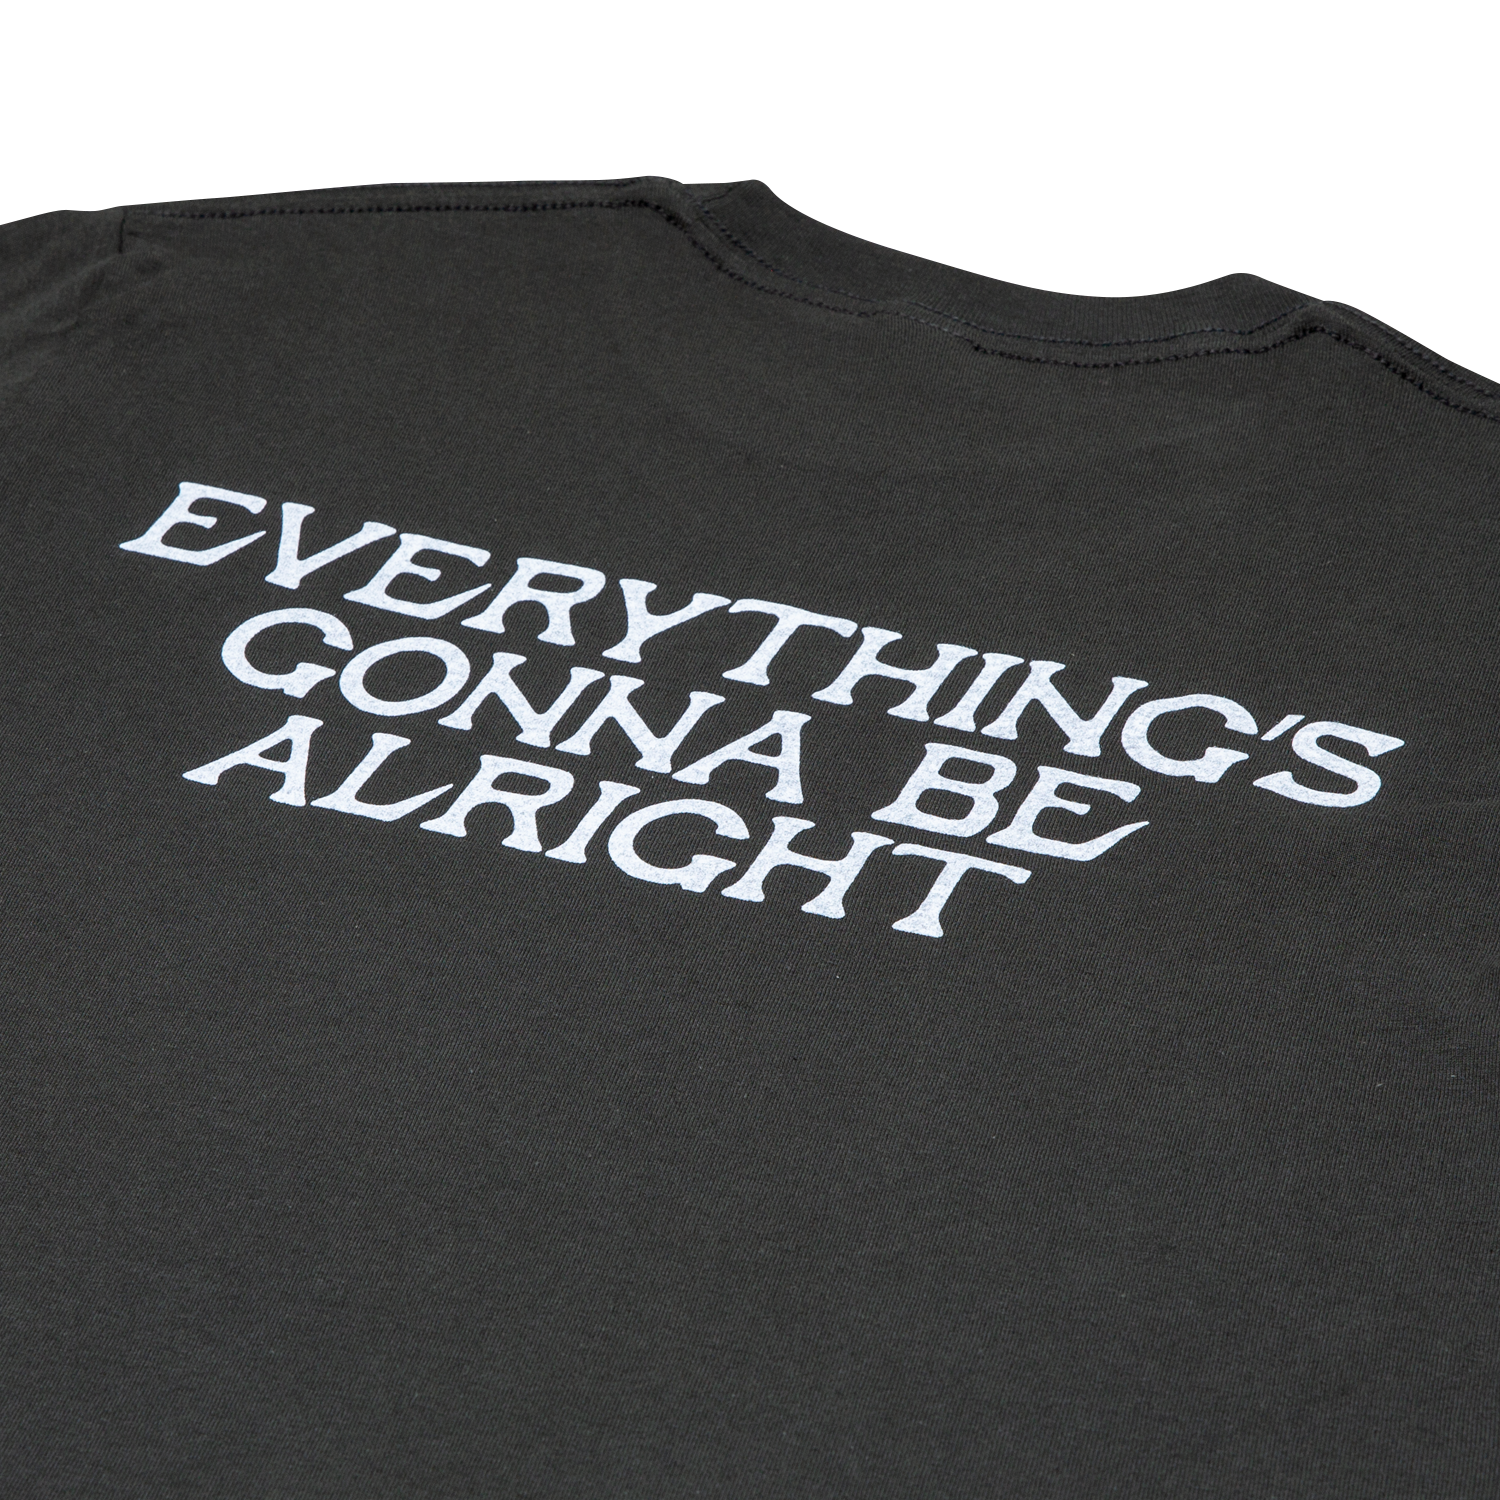 The Alright Tee